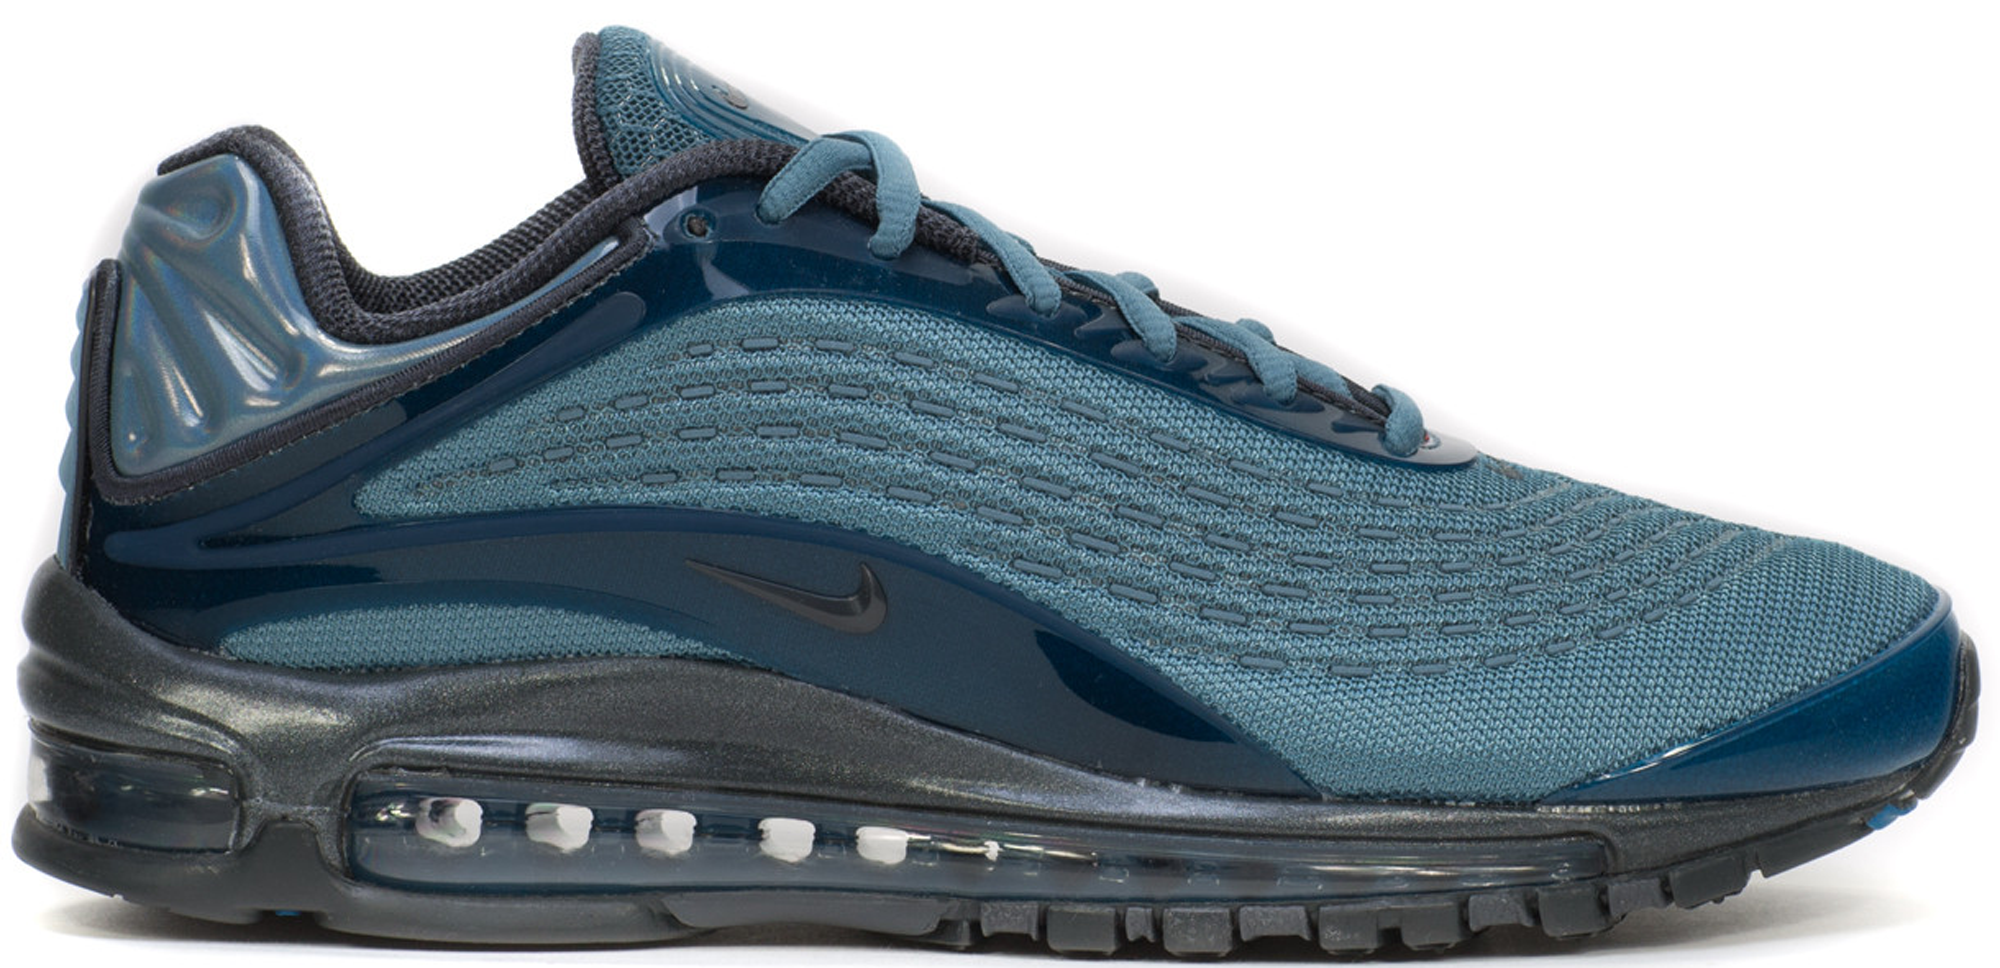 Nike Air Max Deluxe Celestial Teal 